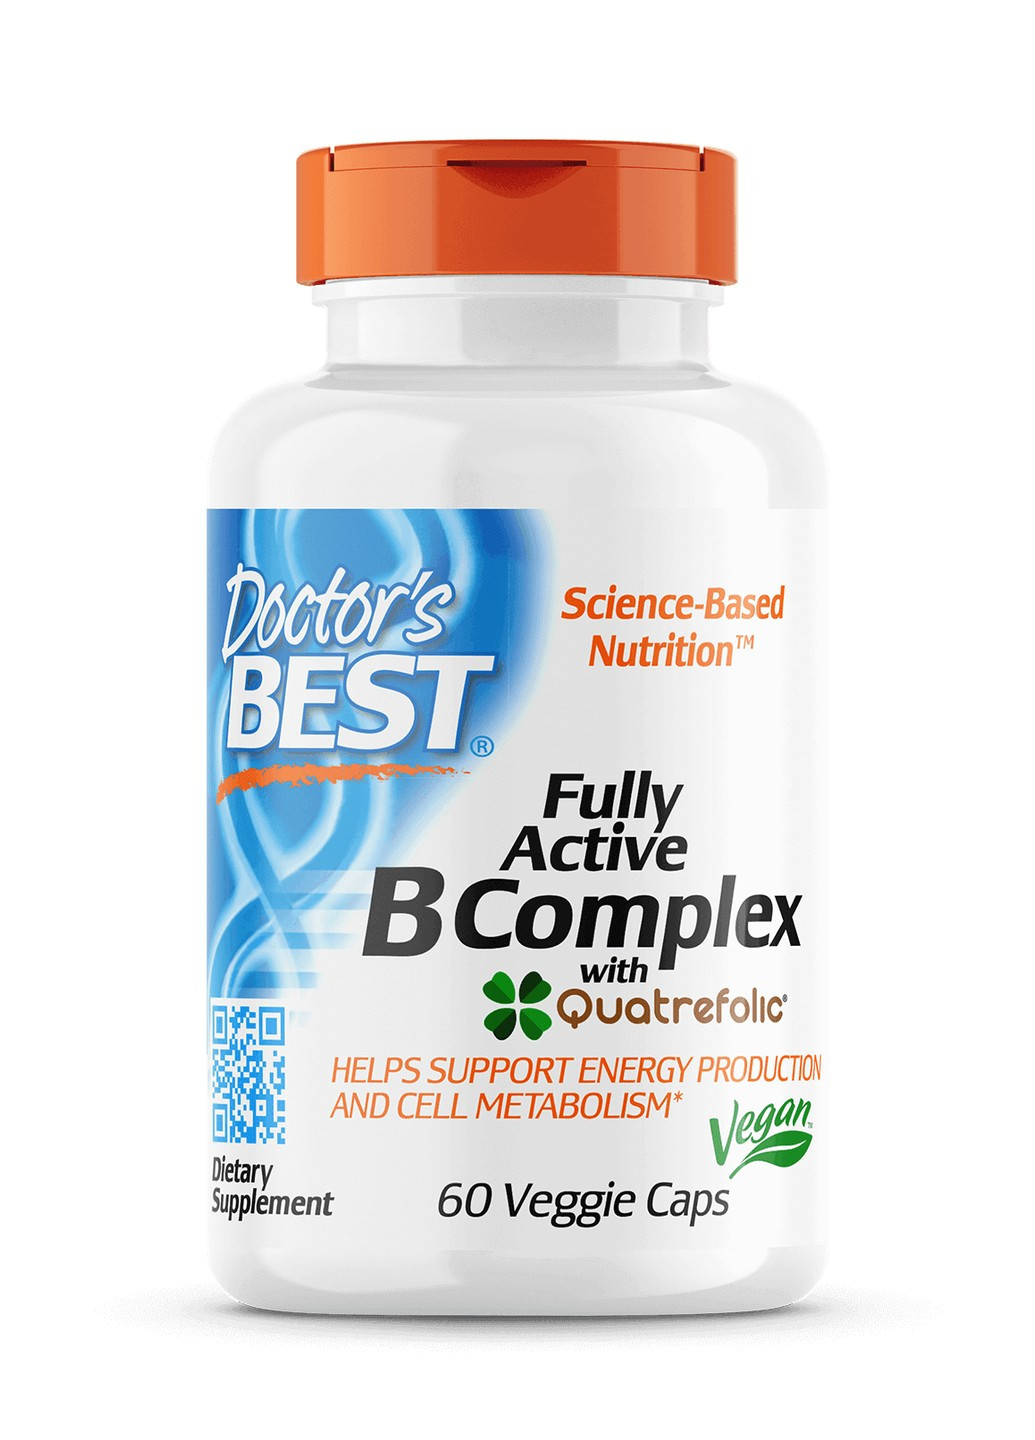 B-Комплекс, Fully Active B Complex,, 60 гелевых капсул Doctor's Best (255409011)